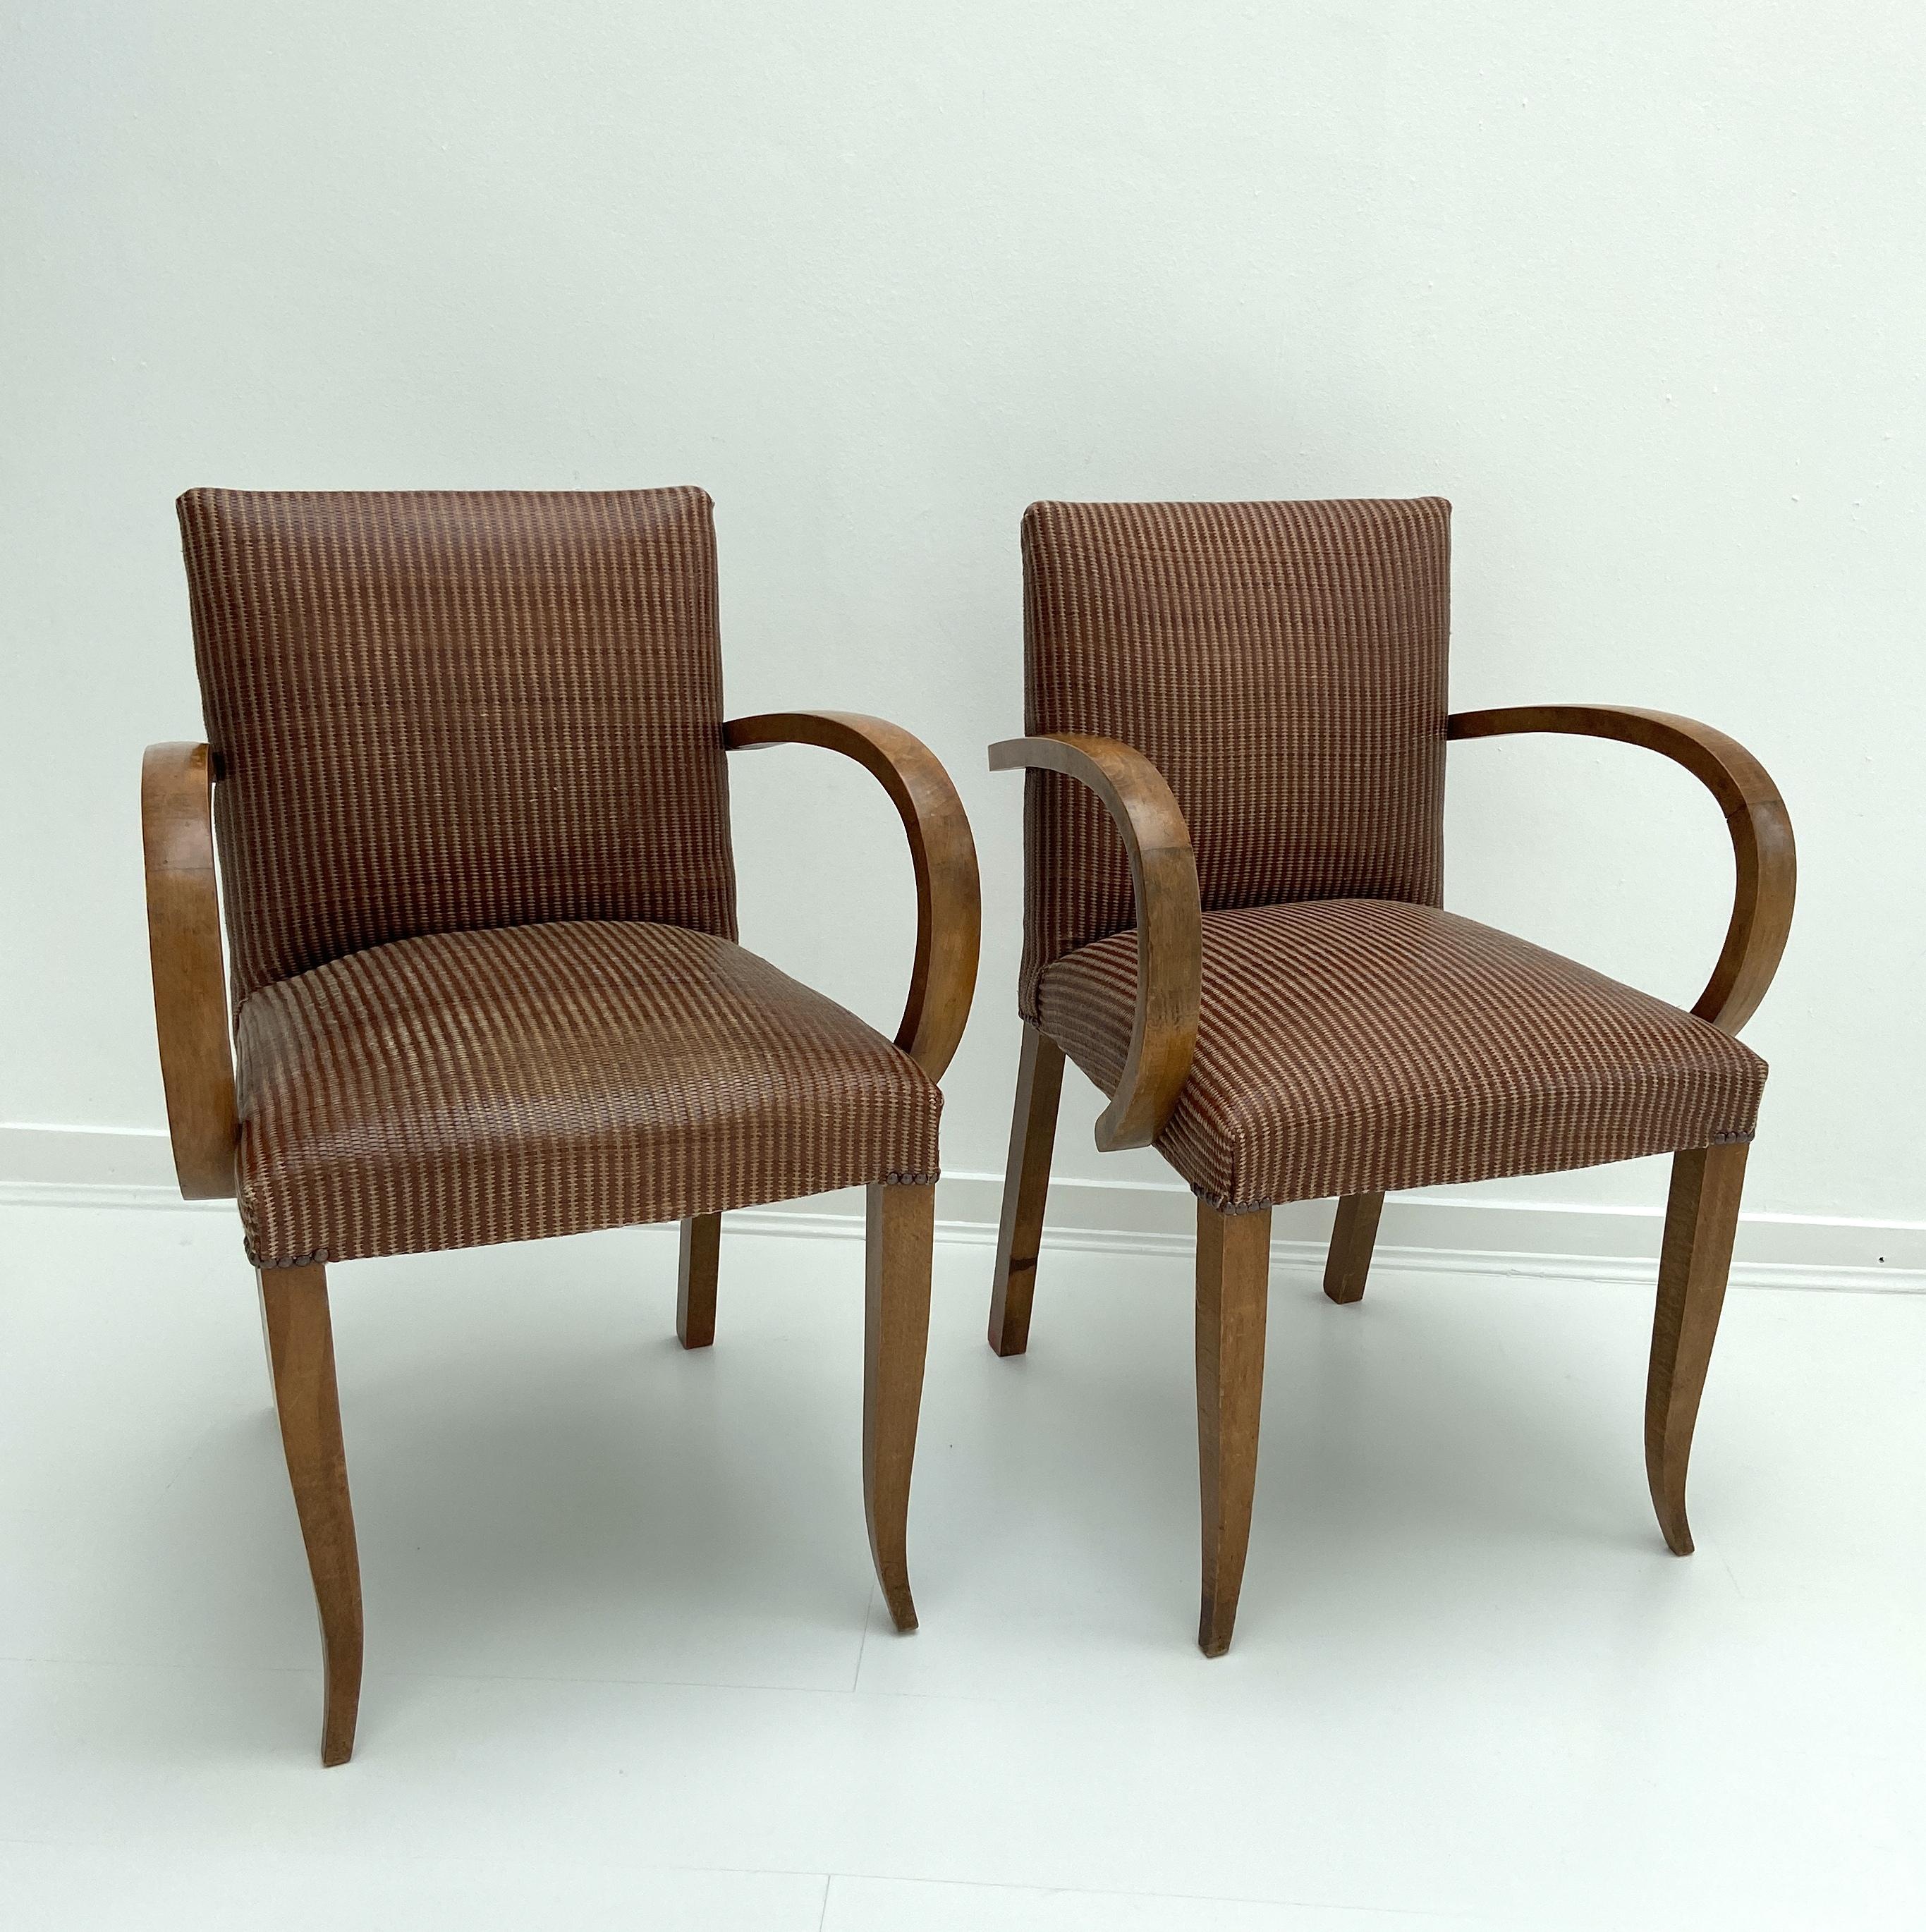 Mid-20th Century Pair of Modernist Bridge Chairs or Armchairs, French, 1930s For Sale